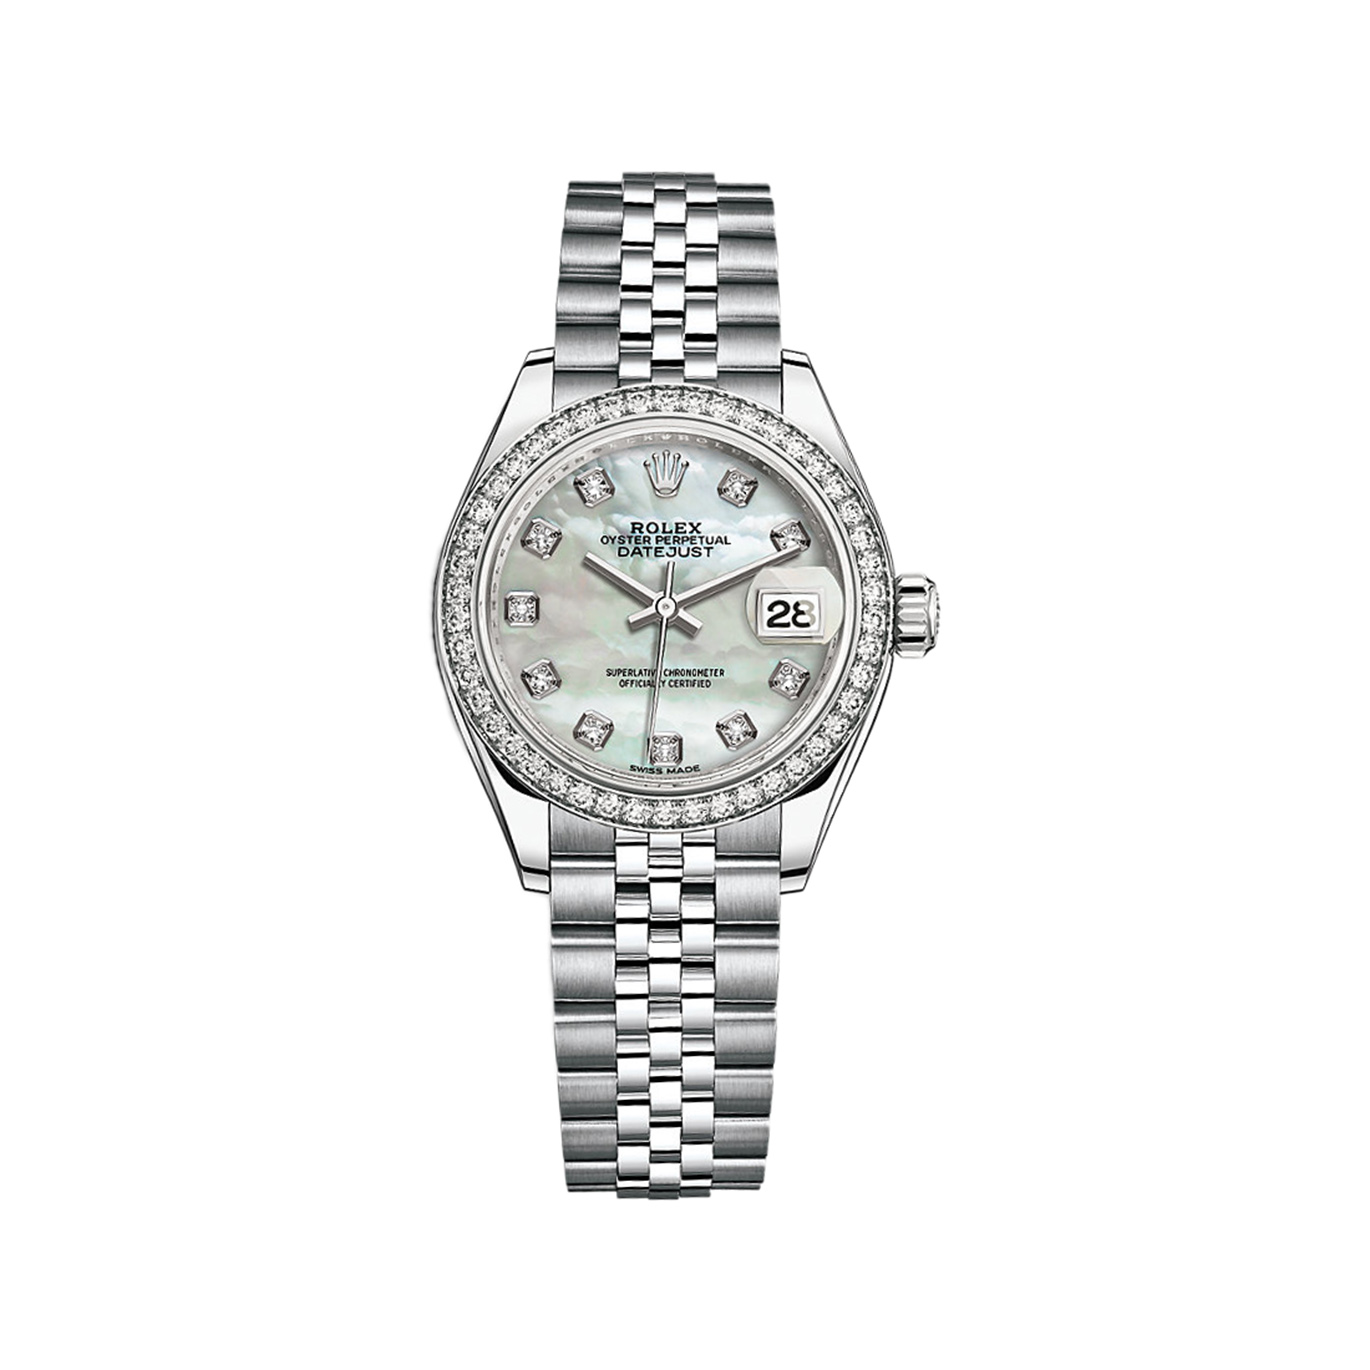 Lady-Datejust 28 279384RBR White Gold & Stainless Steel Watch (White Mother-of-Pearl Set with Diamonds)